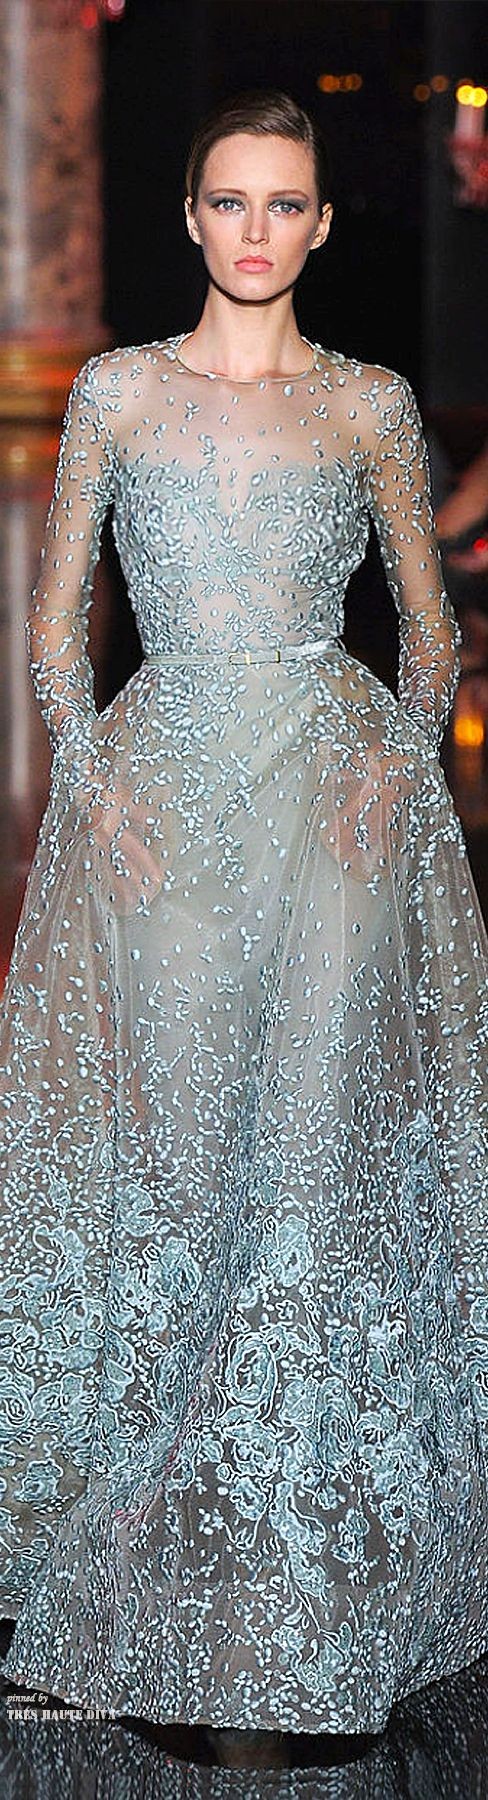 Elie Saab Couture F/W 2014 Couture